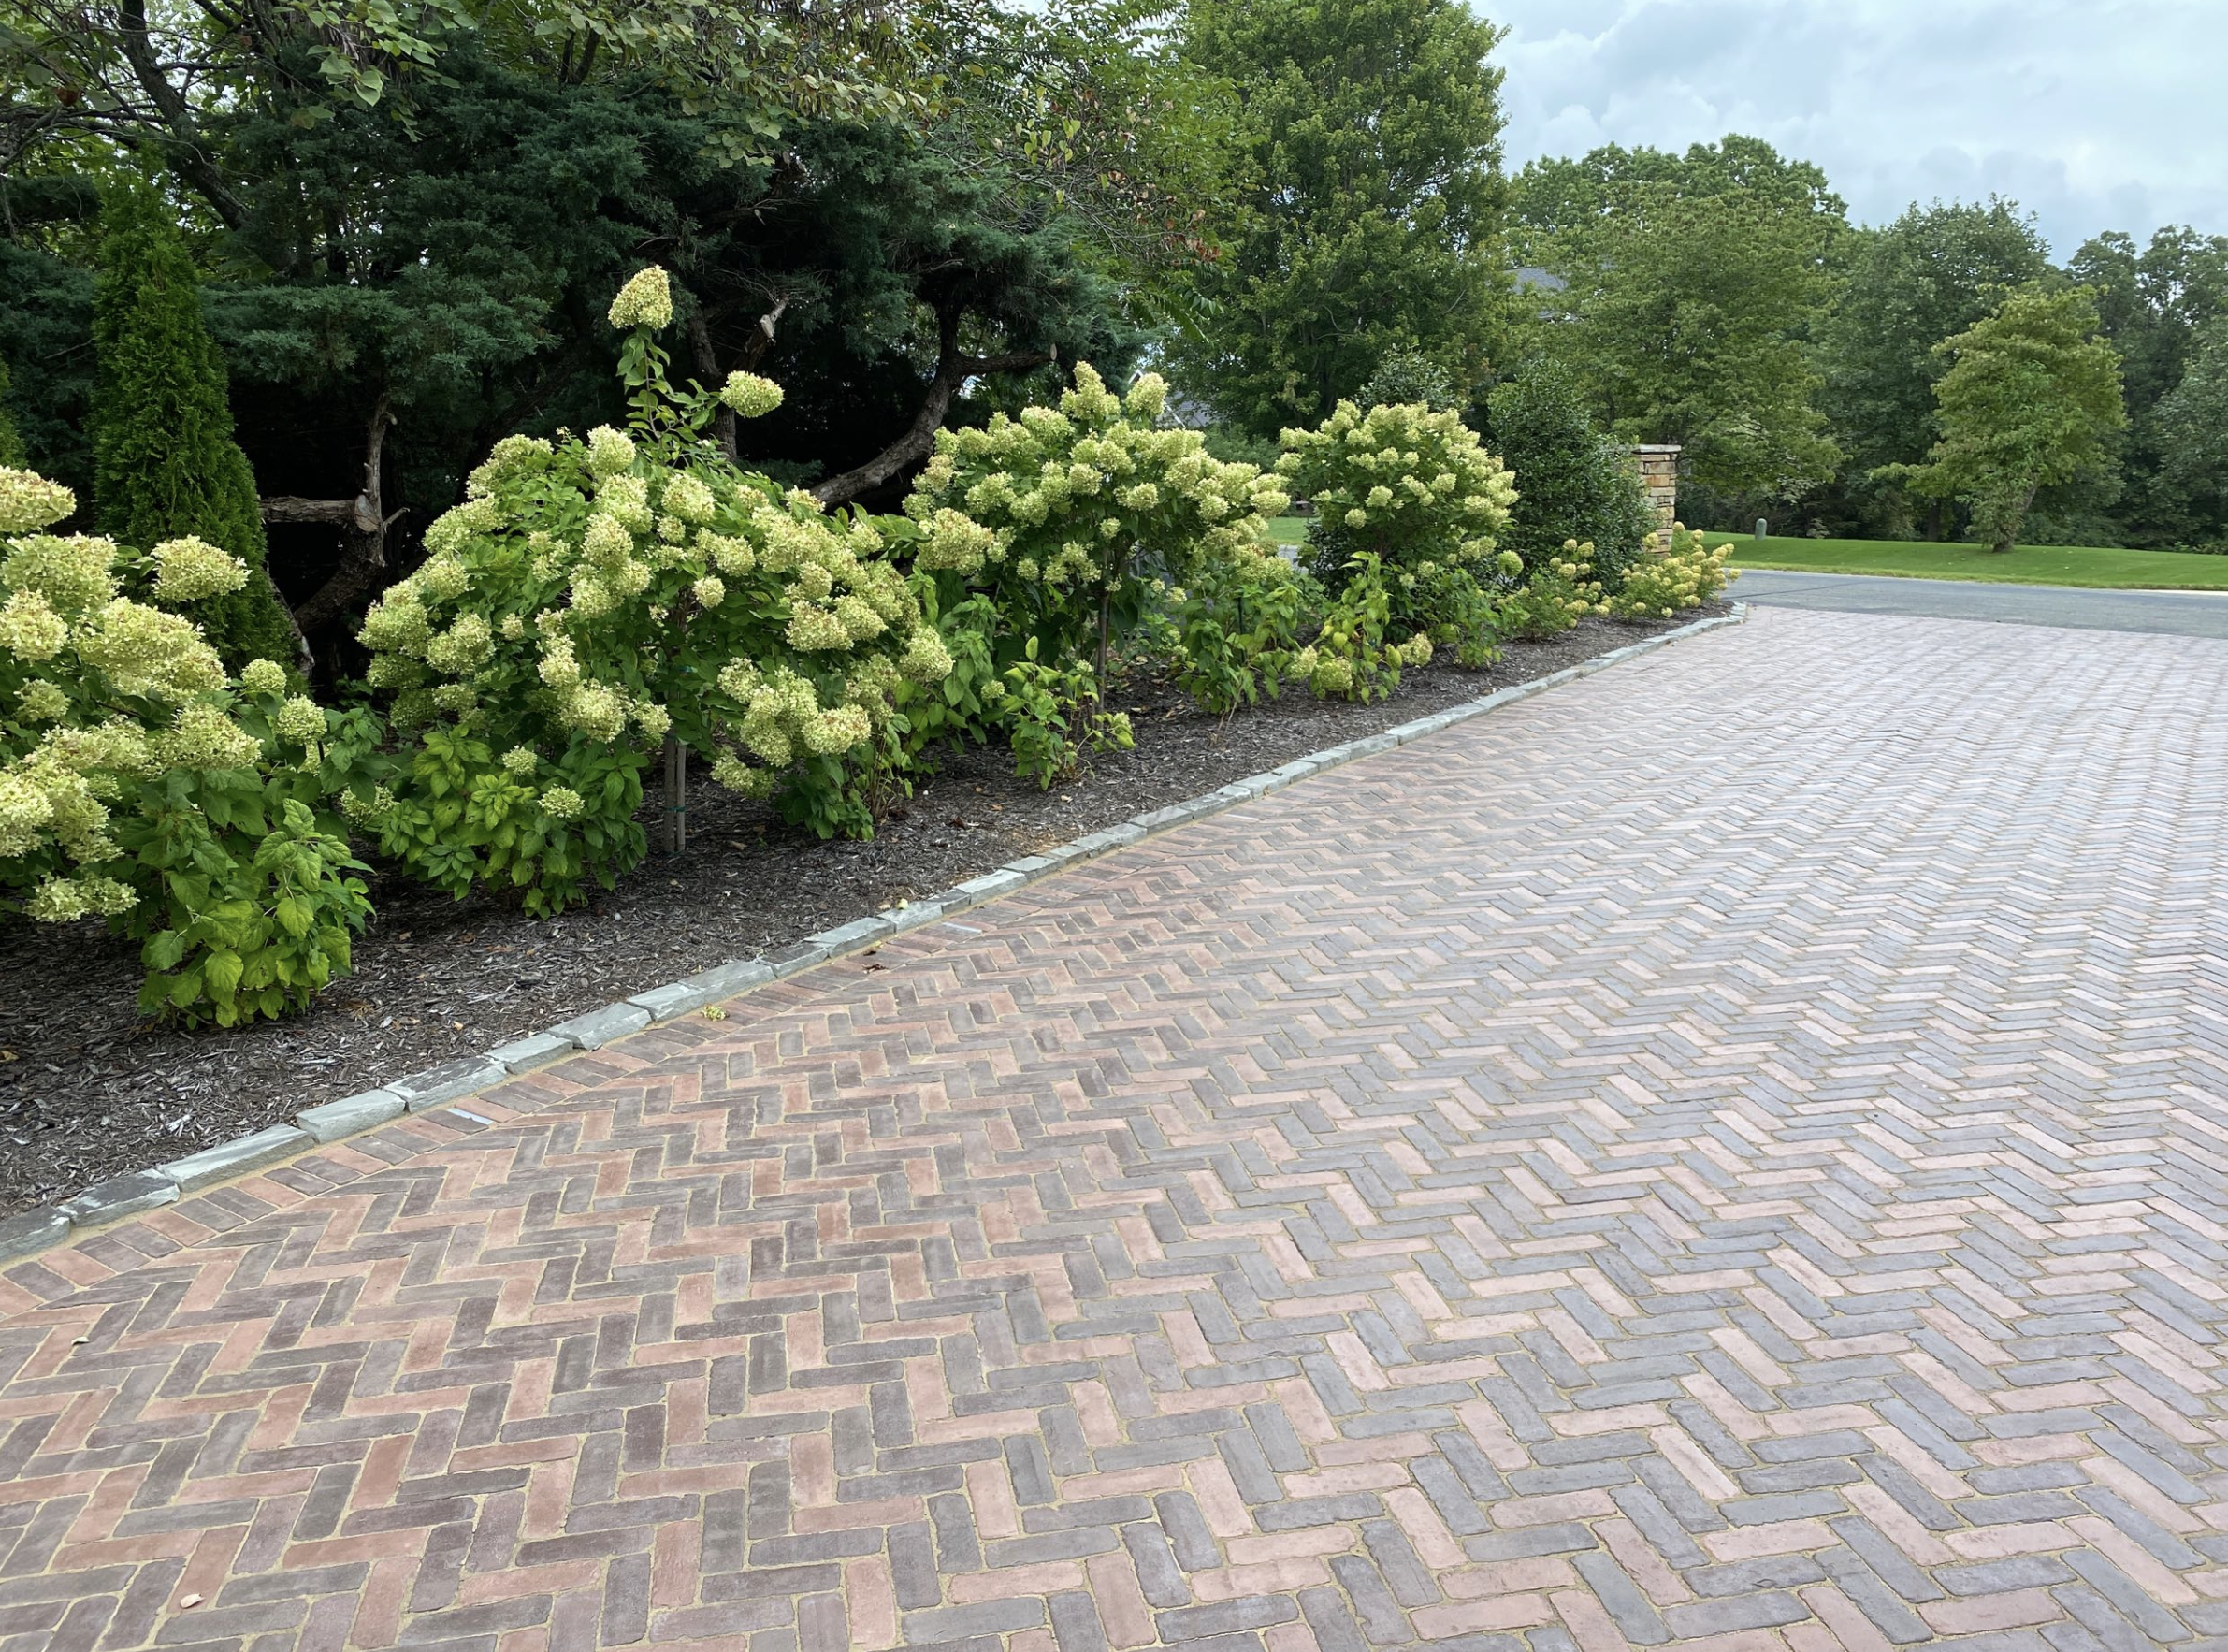 Pavers change the normal driveway to a show stopper